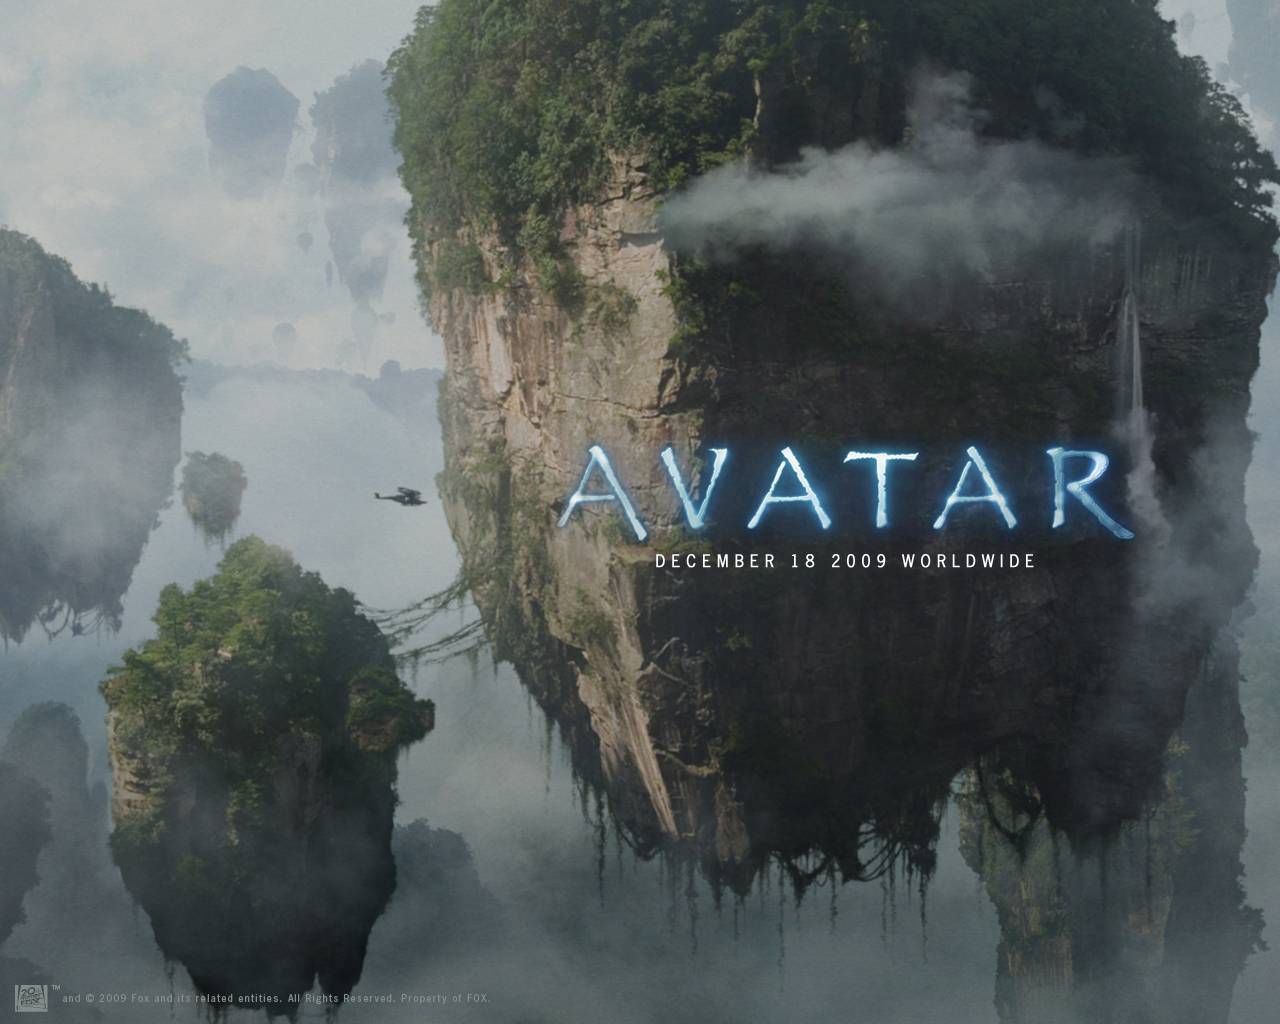 Avatar wallpapers